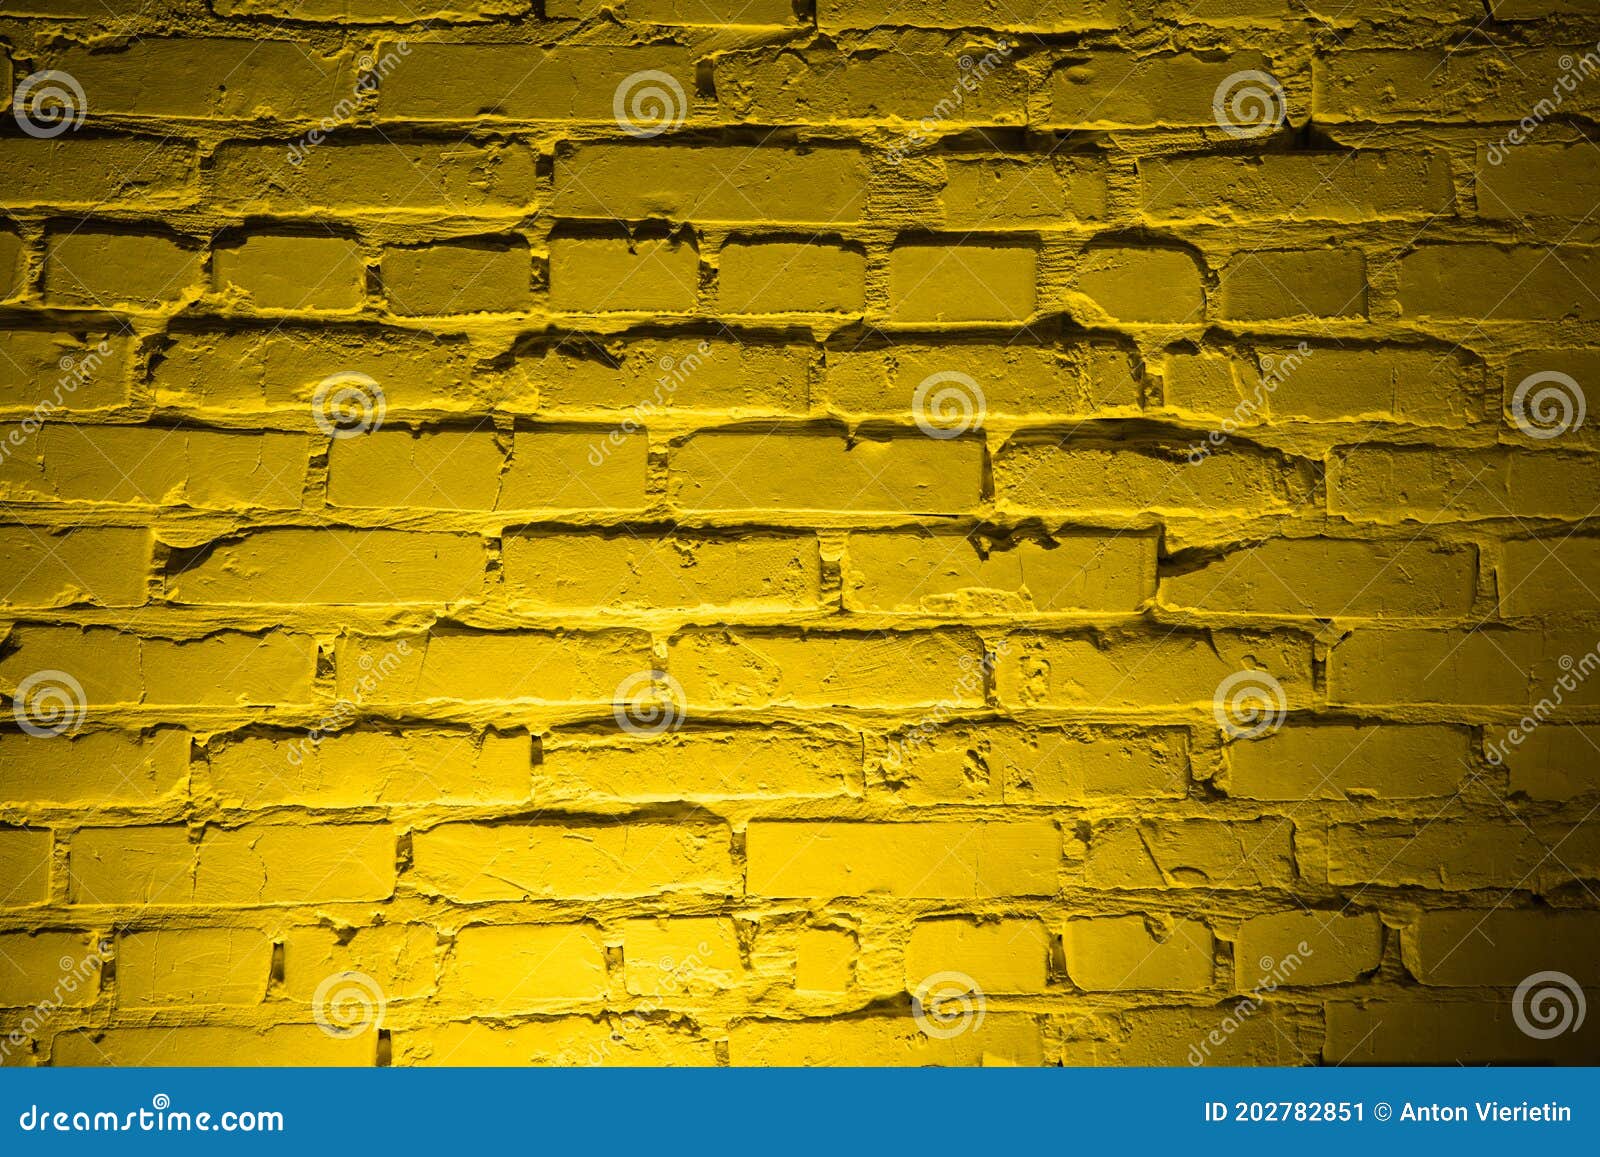 Simple Yellow Neon Wallpaper Background Wallpaper Image For Free Download   Pngtree